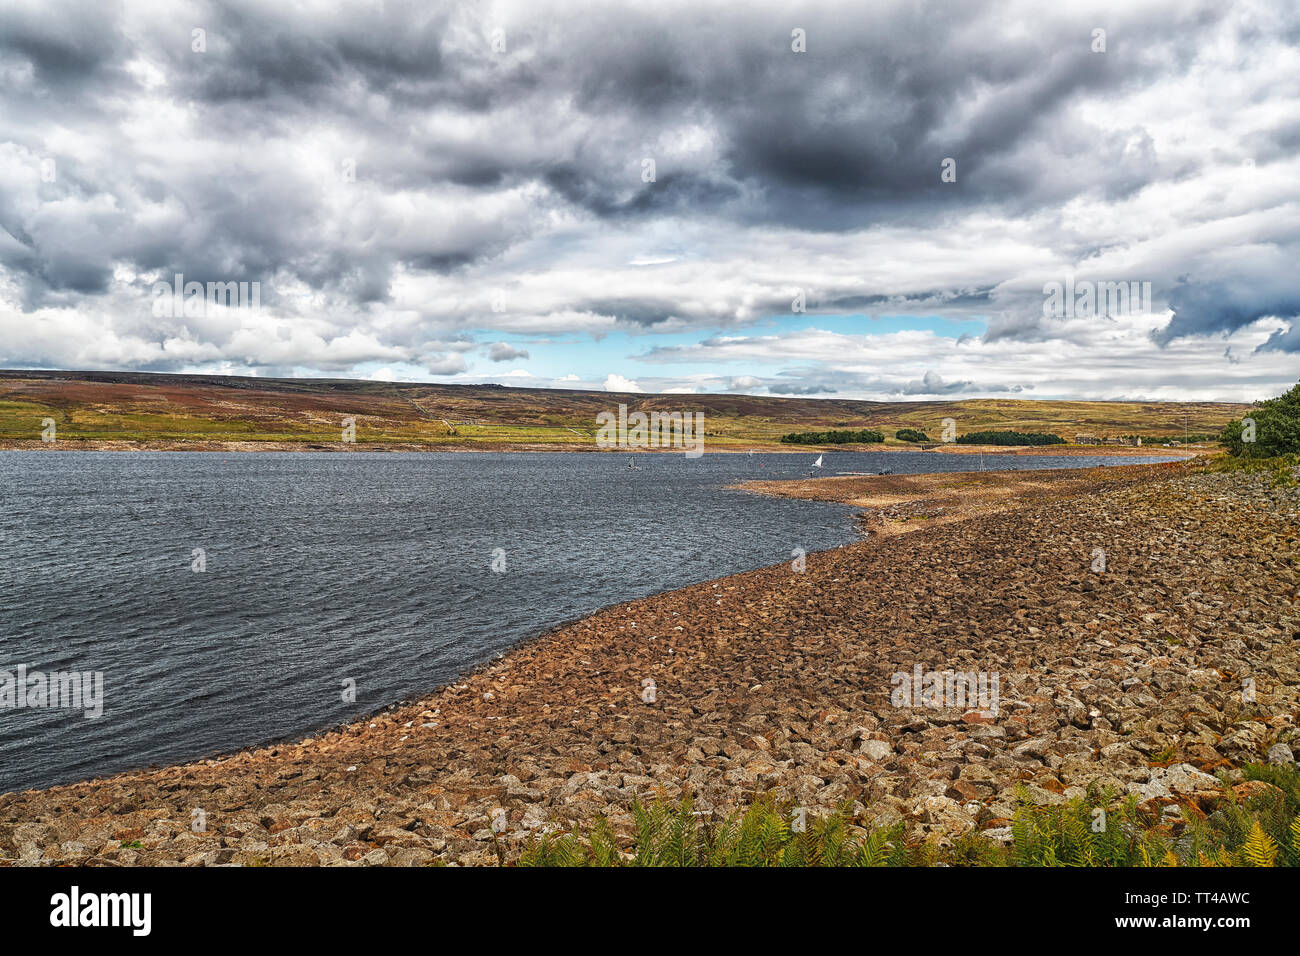 Grimwith Reservoir,Yorkshire Dales with dark rain clouds Stock Photo